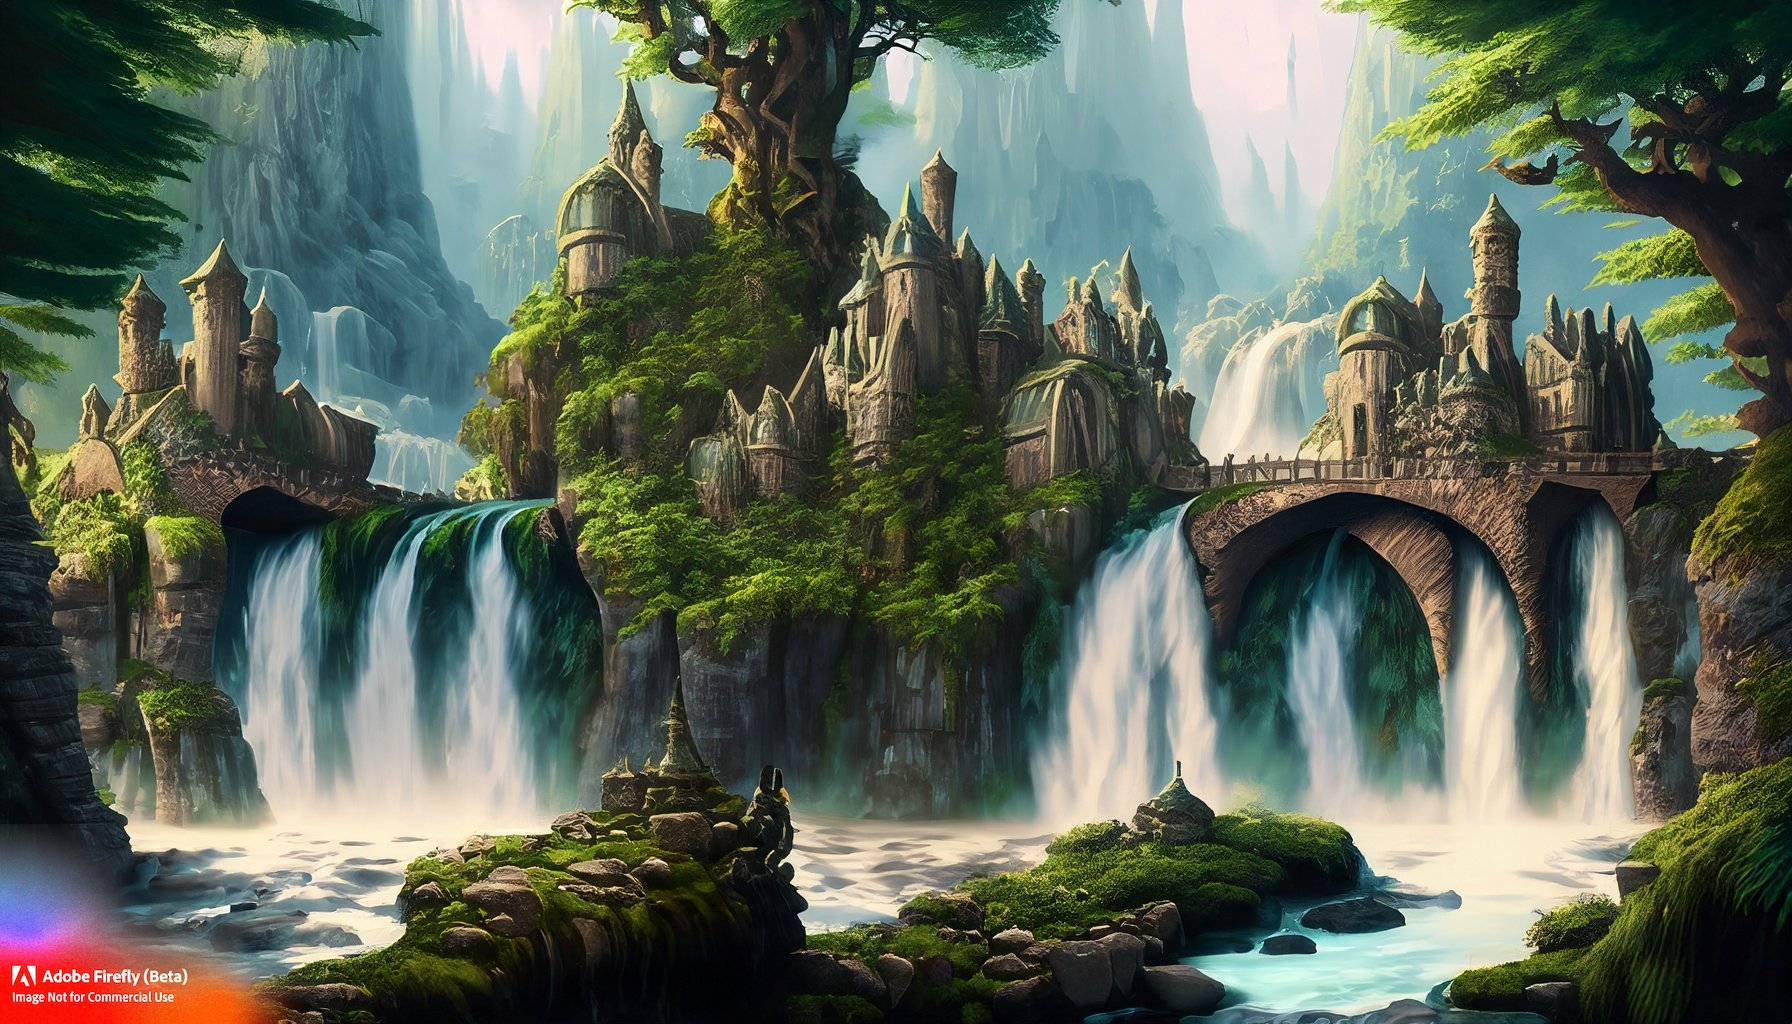 Firefly_a+fae woodland kingdom made of stone buildings on top of waterfalls, surrounded by evergreens, deep greens_art,wide_angle_6754.jpg